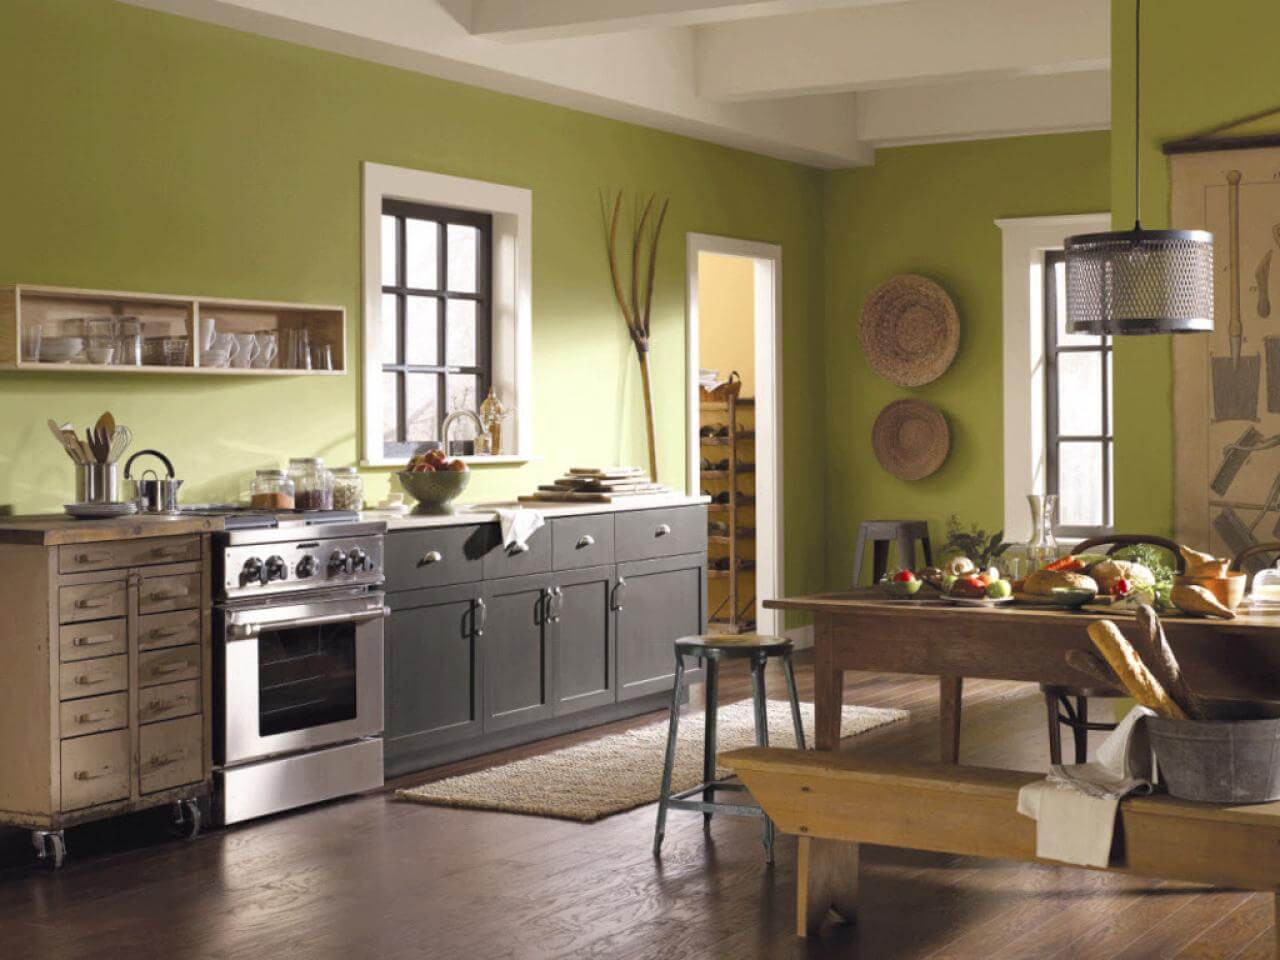 Wall Colors For Kitchen
 Trending Kitchen Wall Colors For The Year 2019